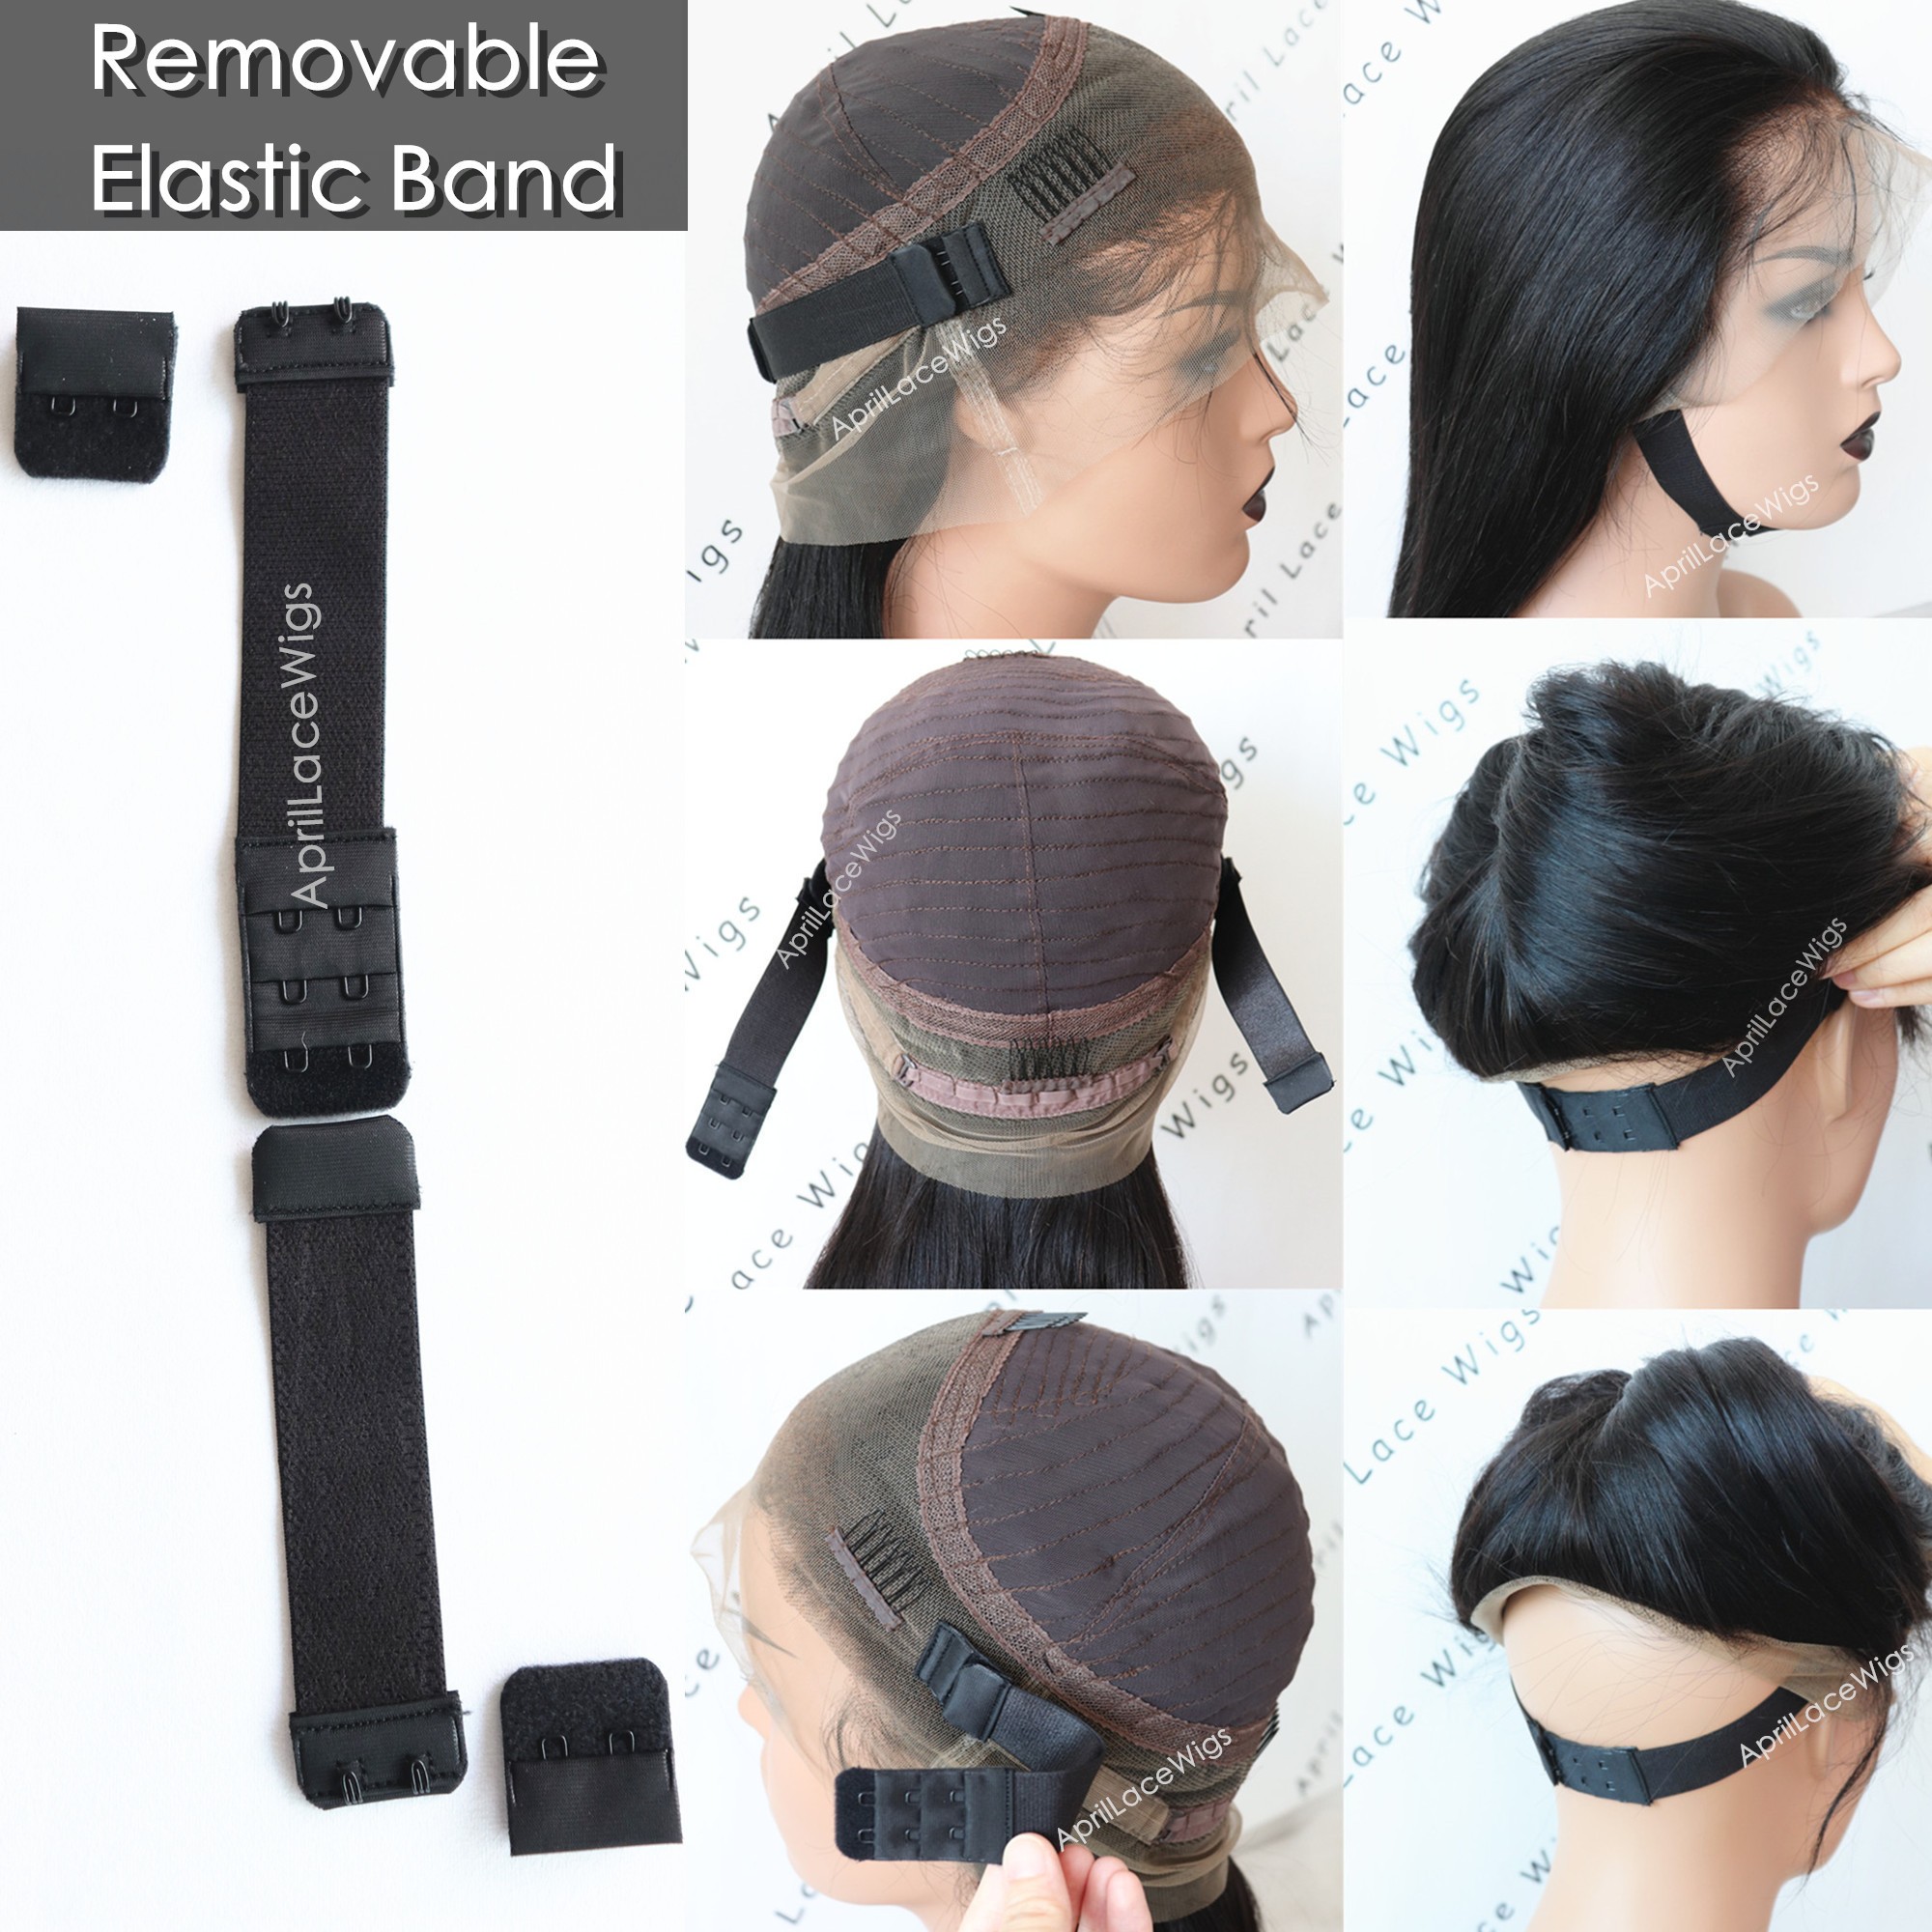 Lux Adjustable Band- Make your wigs glueless!